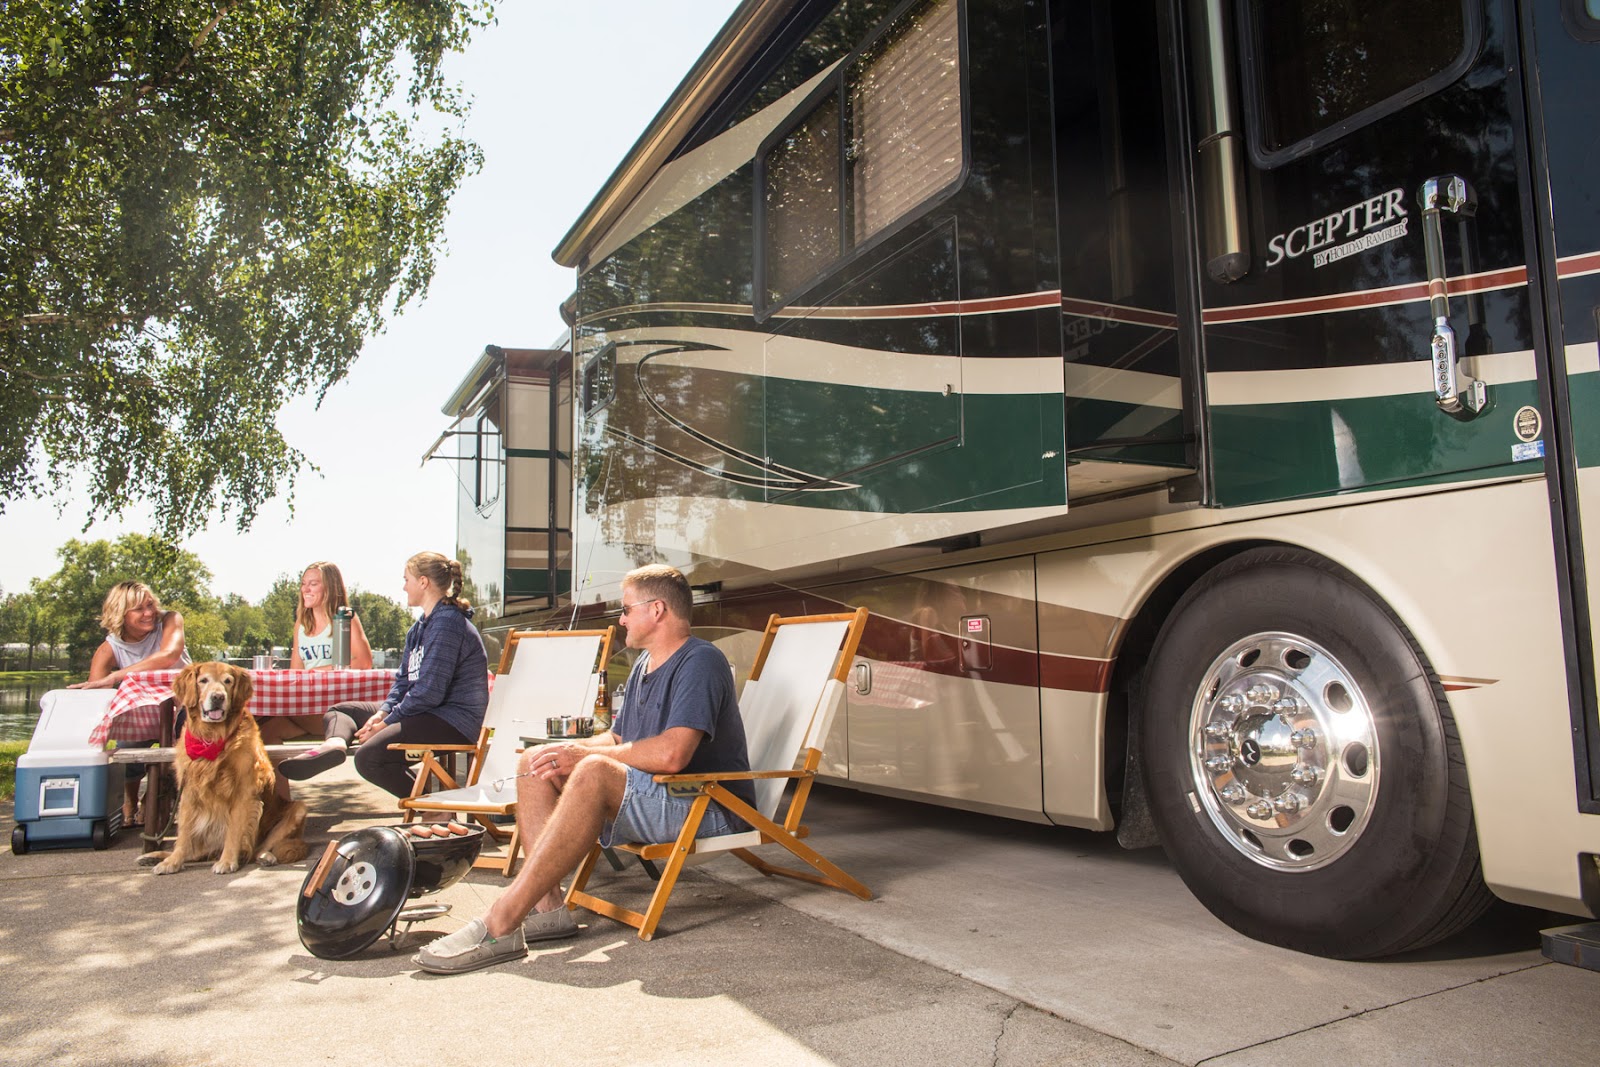  A family sitting together on their patio furniture outside of their RV while camping.